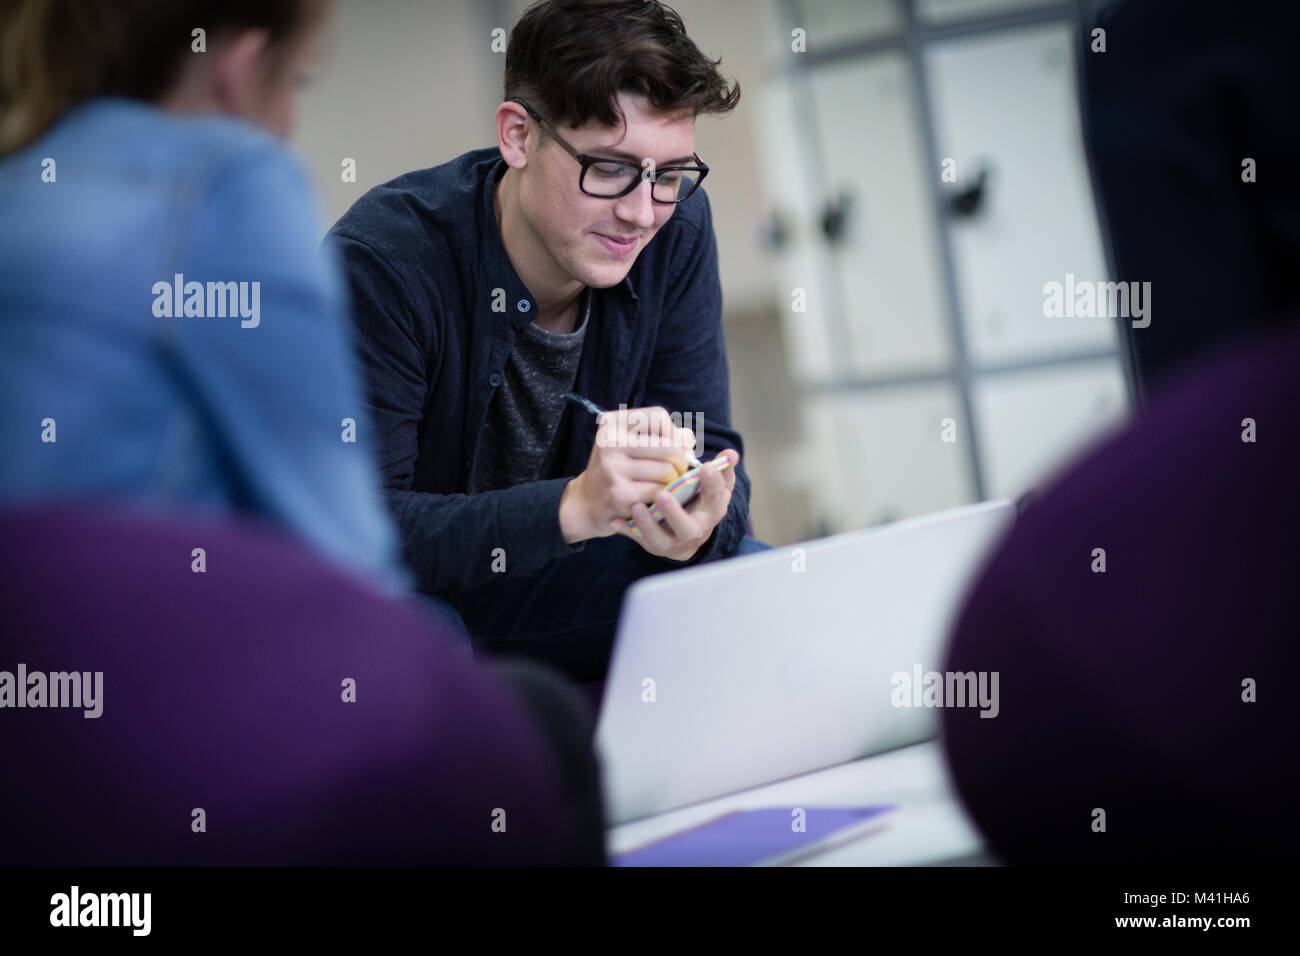 Student writing a note at college Stock Photo